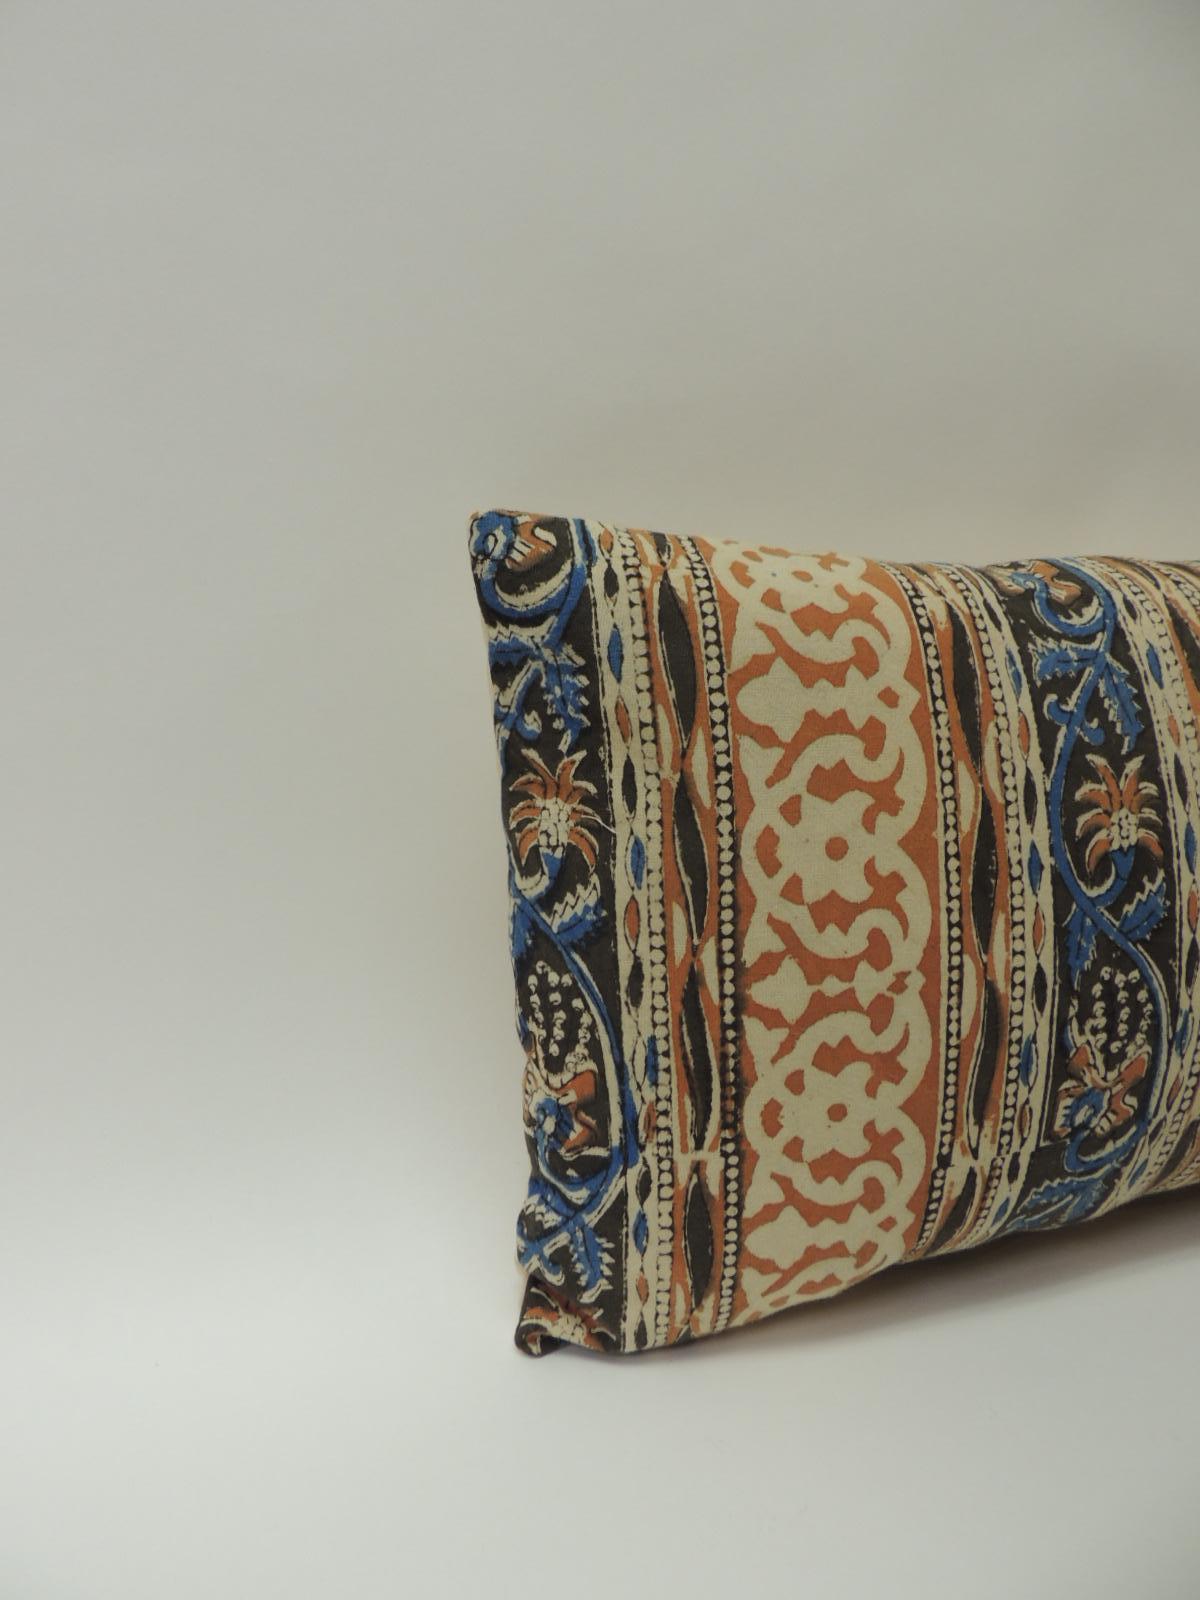 Vintage Indian hand-blocked artisanal textile decorative lumbar pillow
Decorative throw pillow handcrafted with a hand-blocked floral vintage cotton artisanal Indian hand-blocked textile panel depicting vertical stripes and finished with a soft